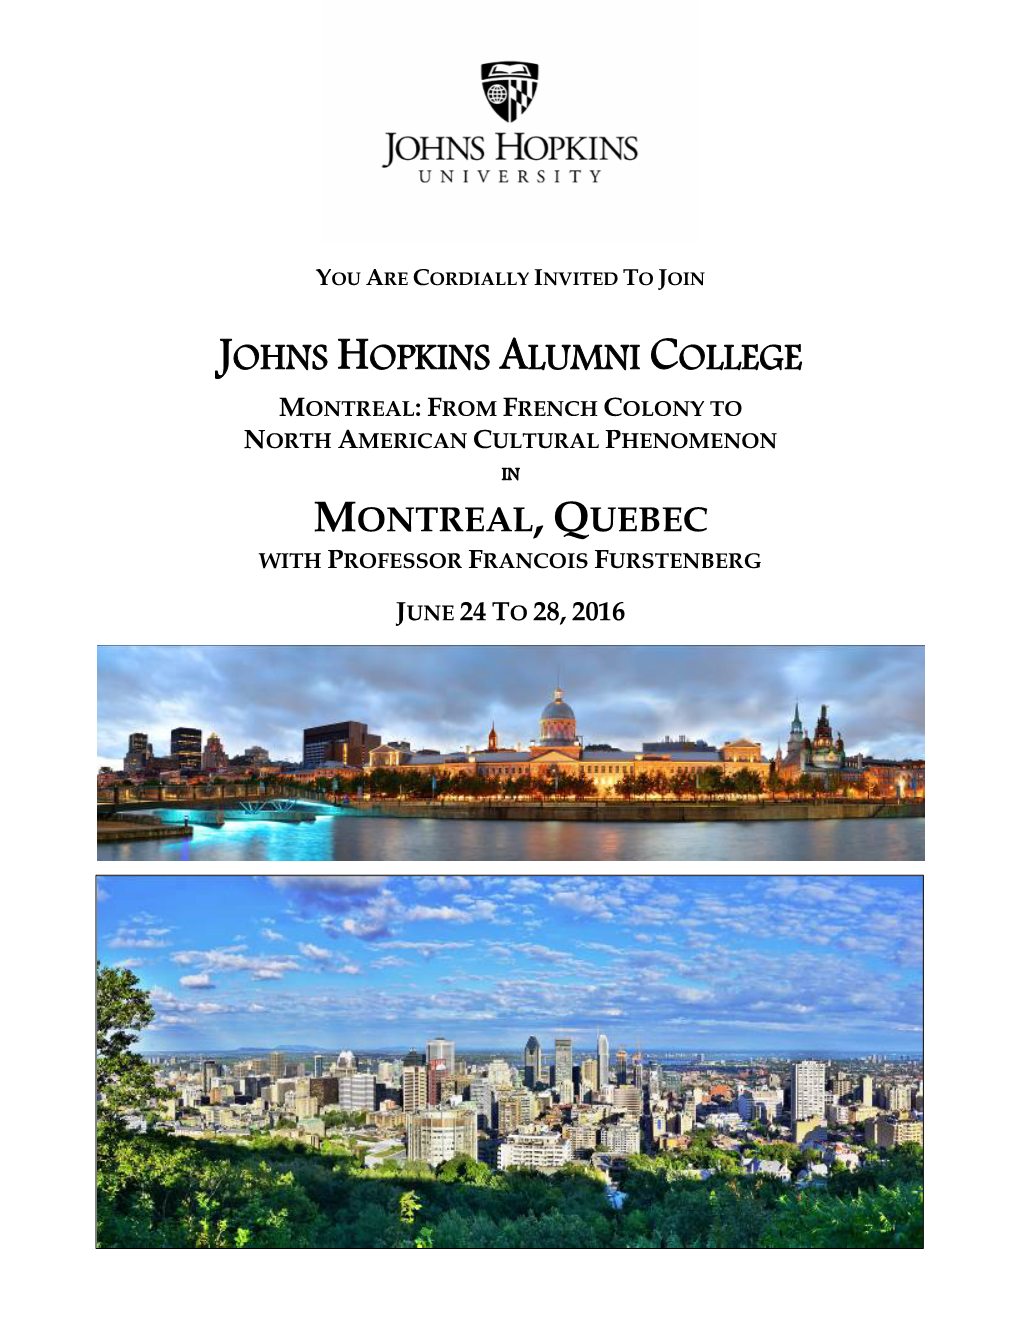 Johns Hopkins Alumni College Montreal: from French Colony to North American Cultural Phenomenon in Montreal, Quebec with Professor Francois Furstenberg